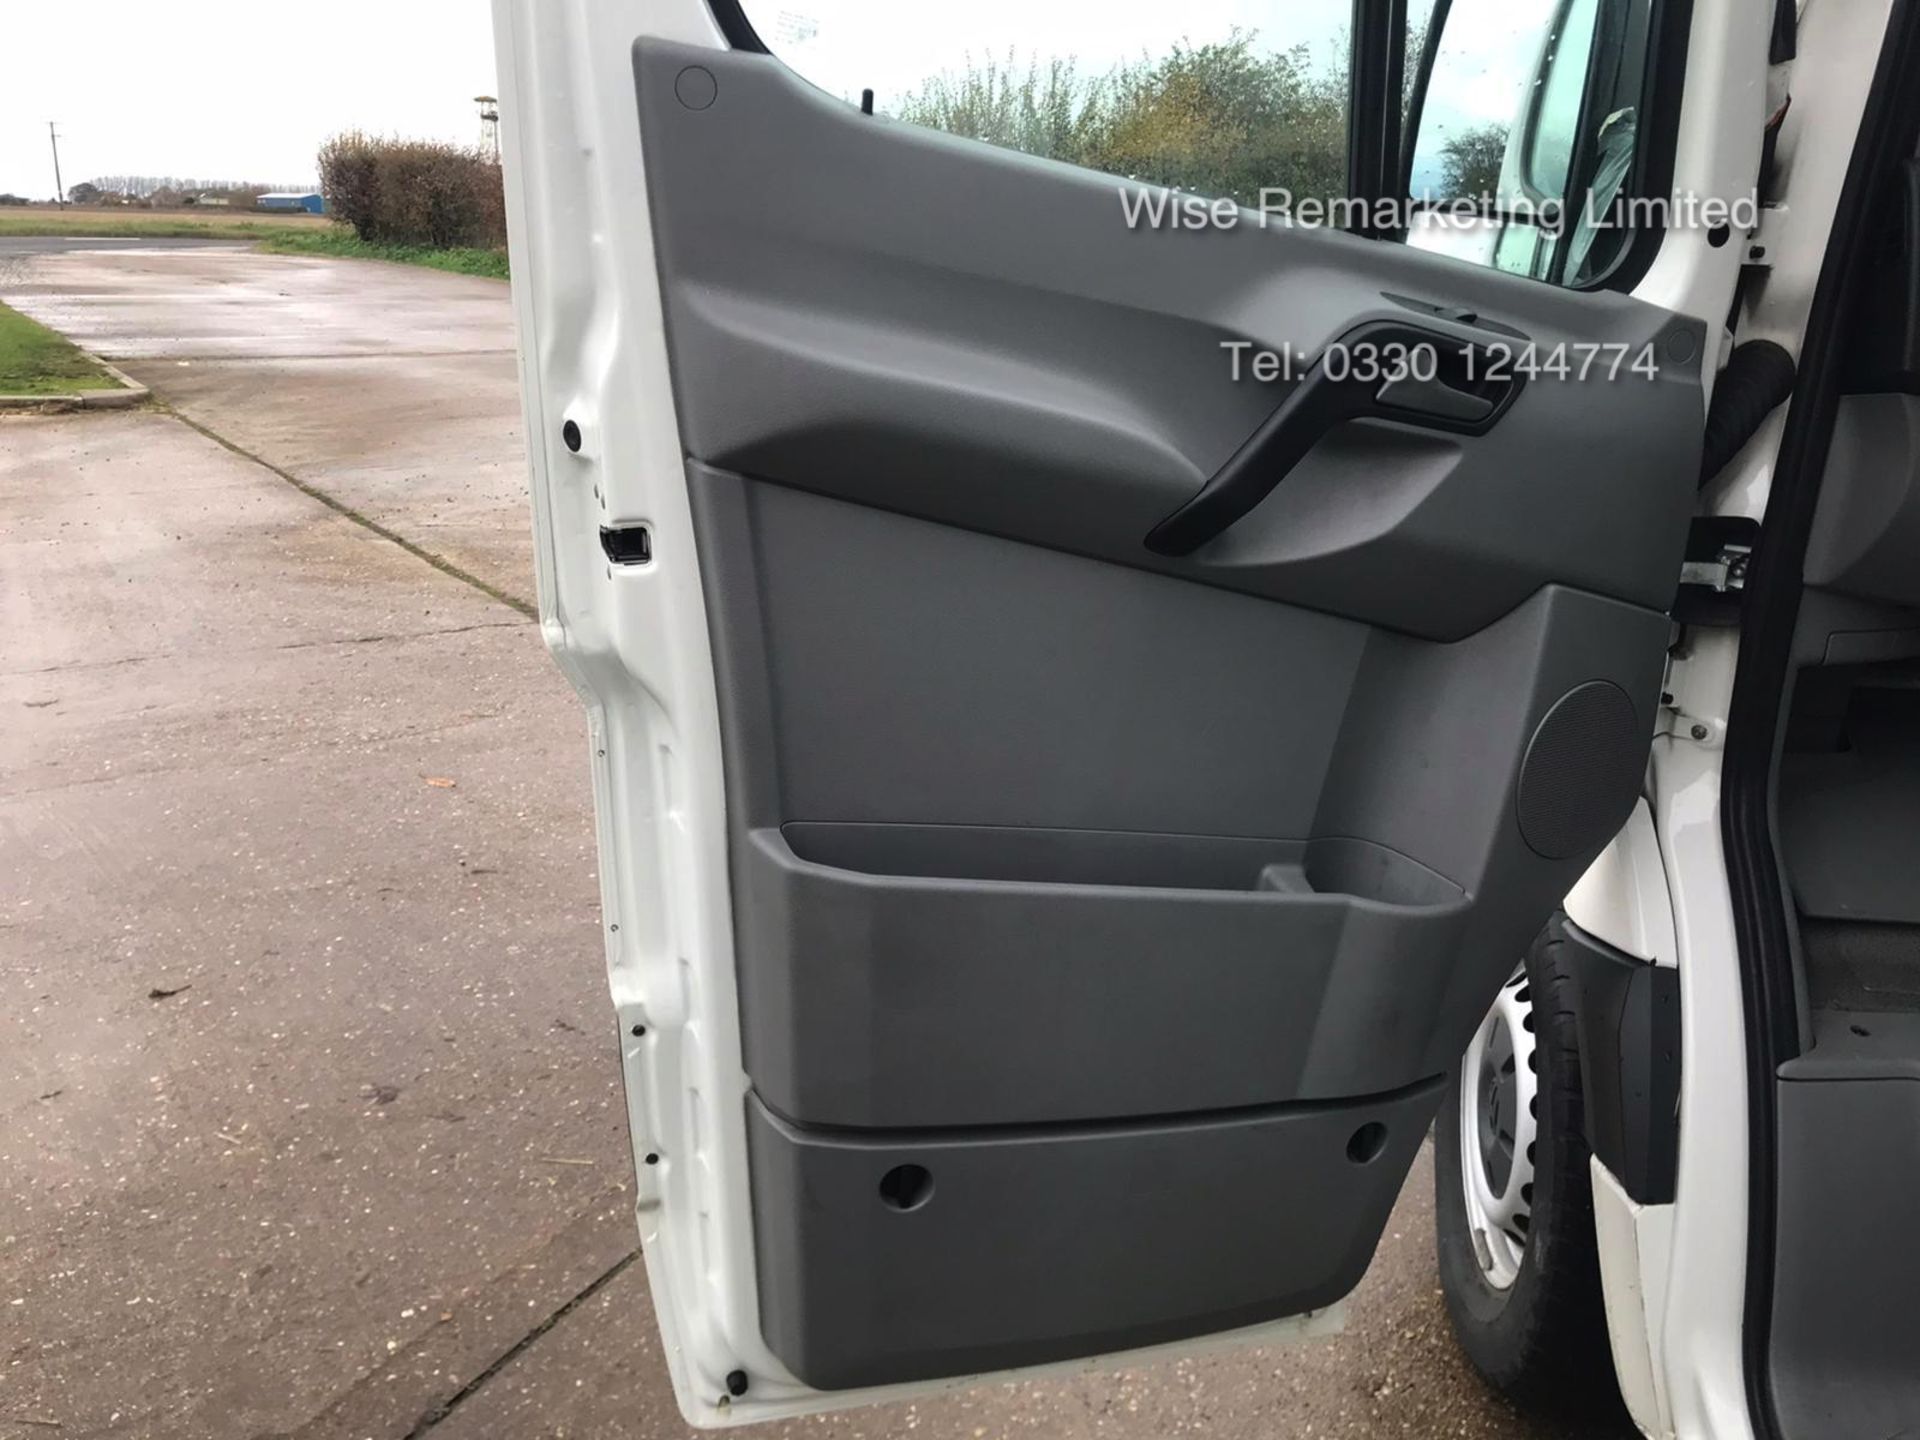 Volkswagen Crafter CR35 Startline 2.0l TDi - LWB - 2016 Model -1 Keeper From New - Service History - Image 7 of 15